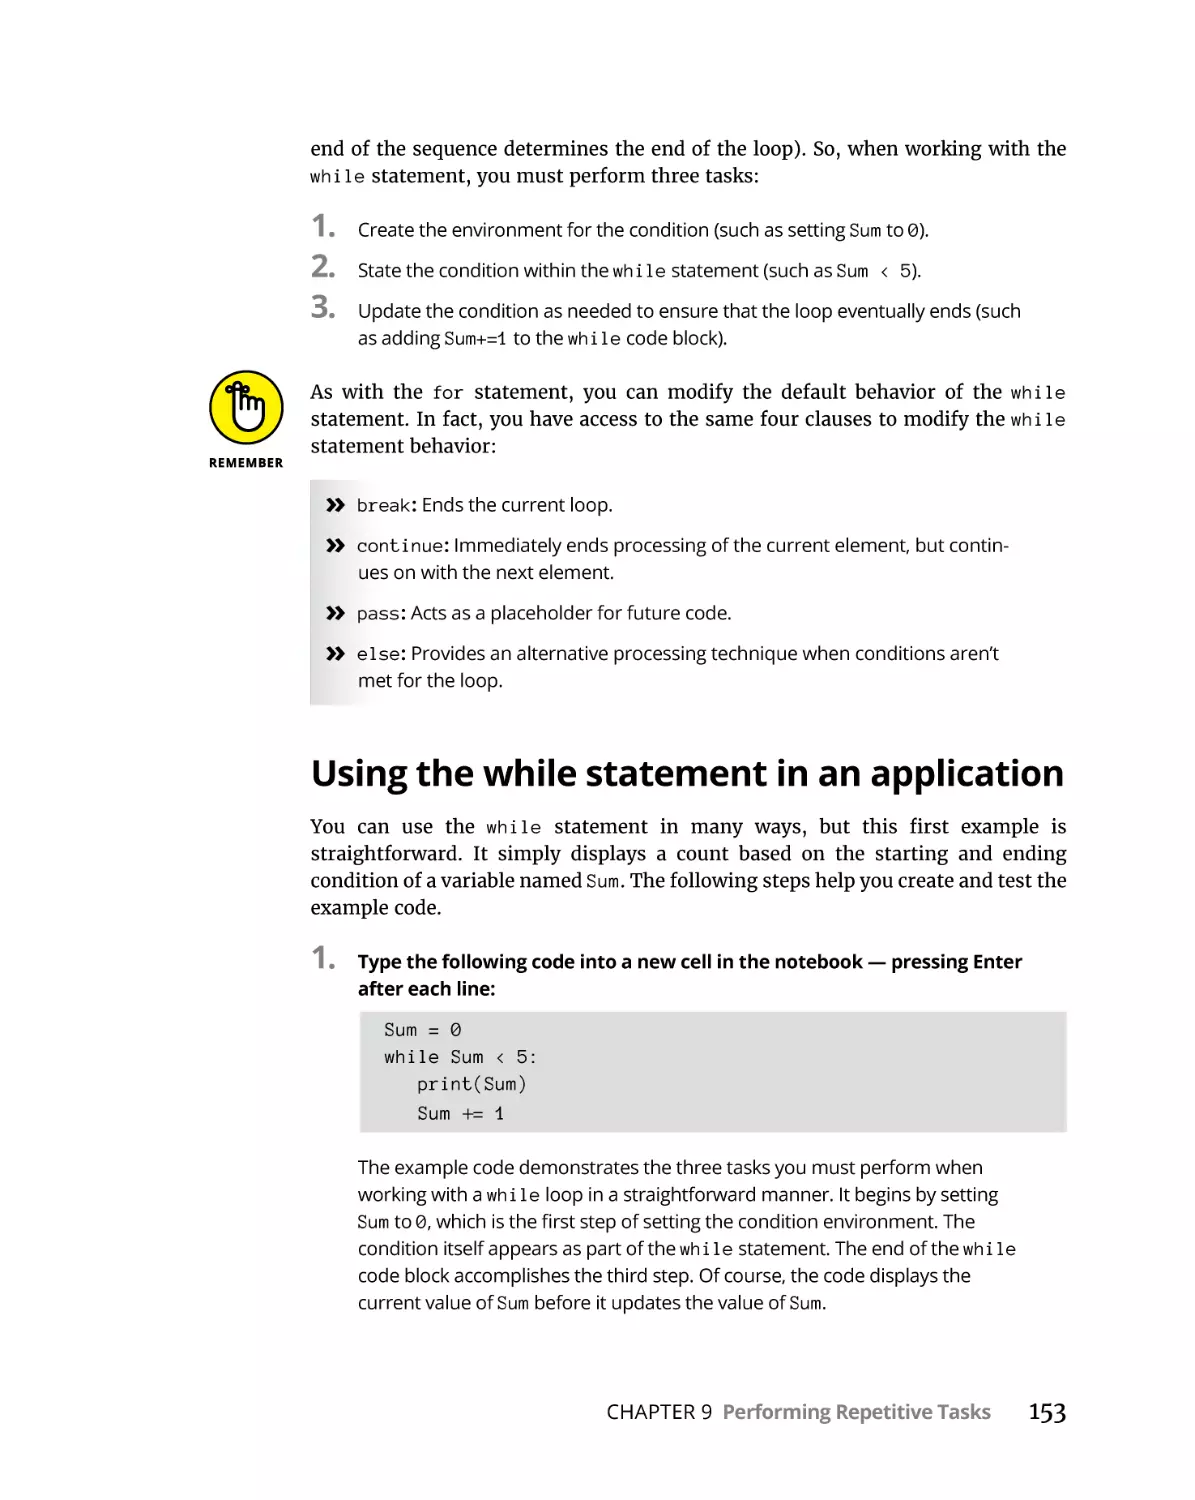 Using the while statement in an application